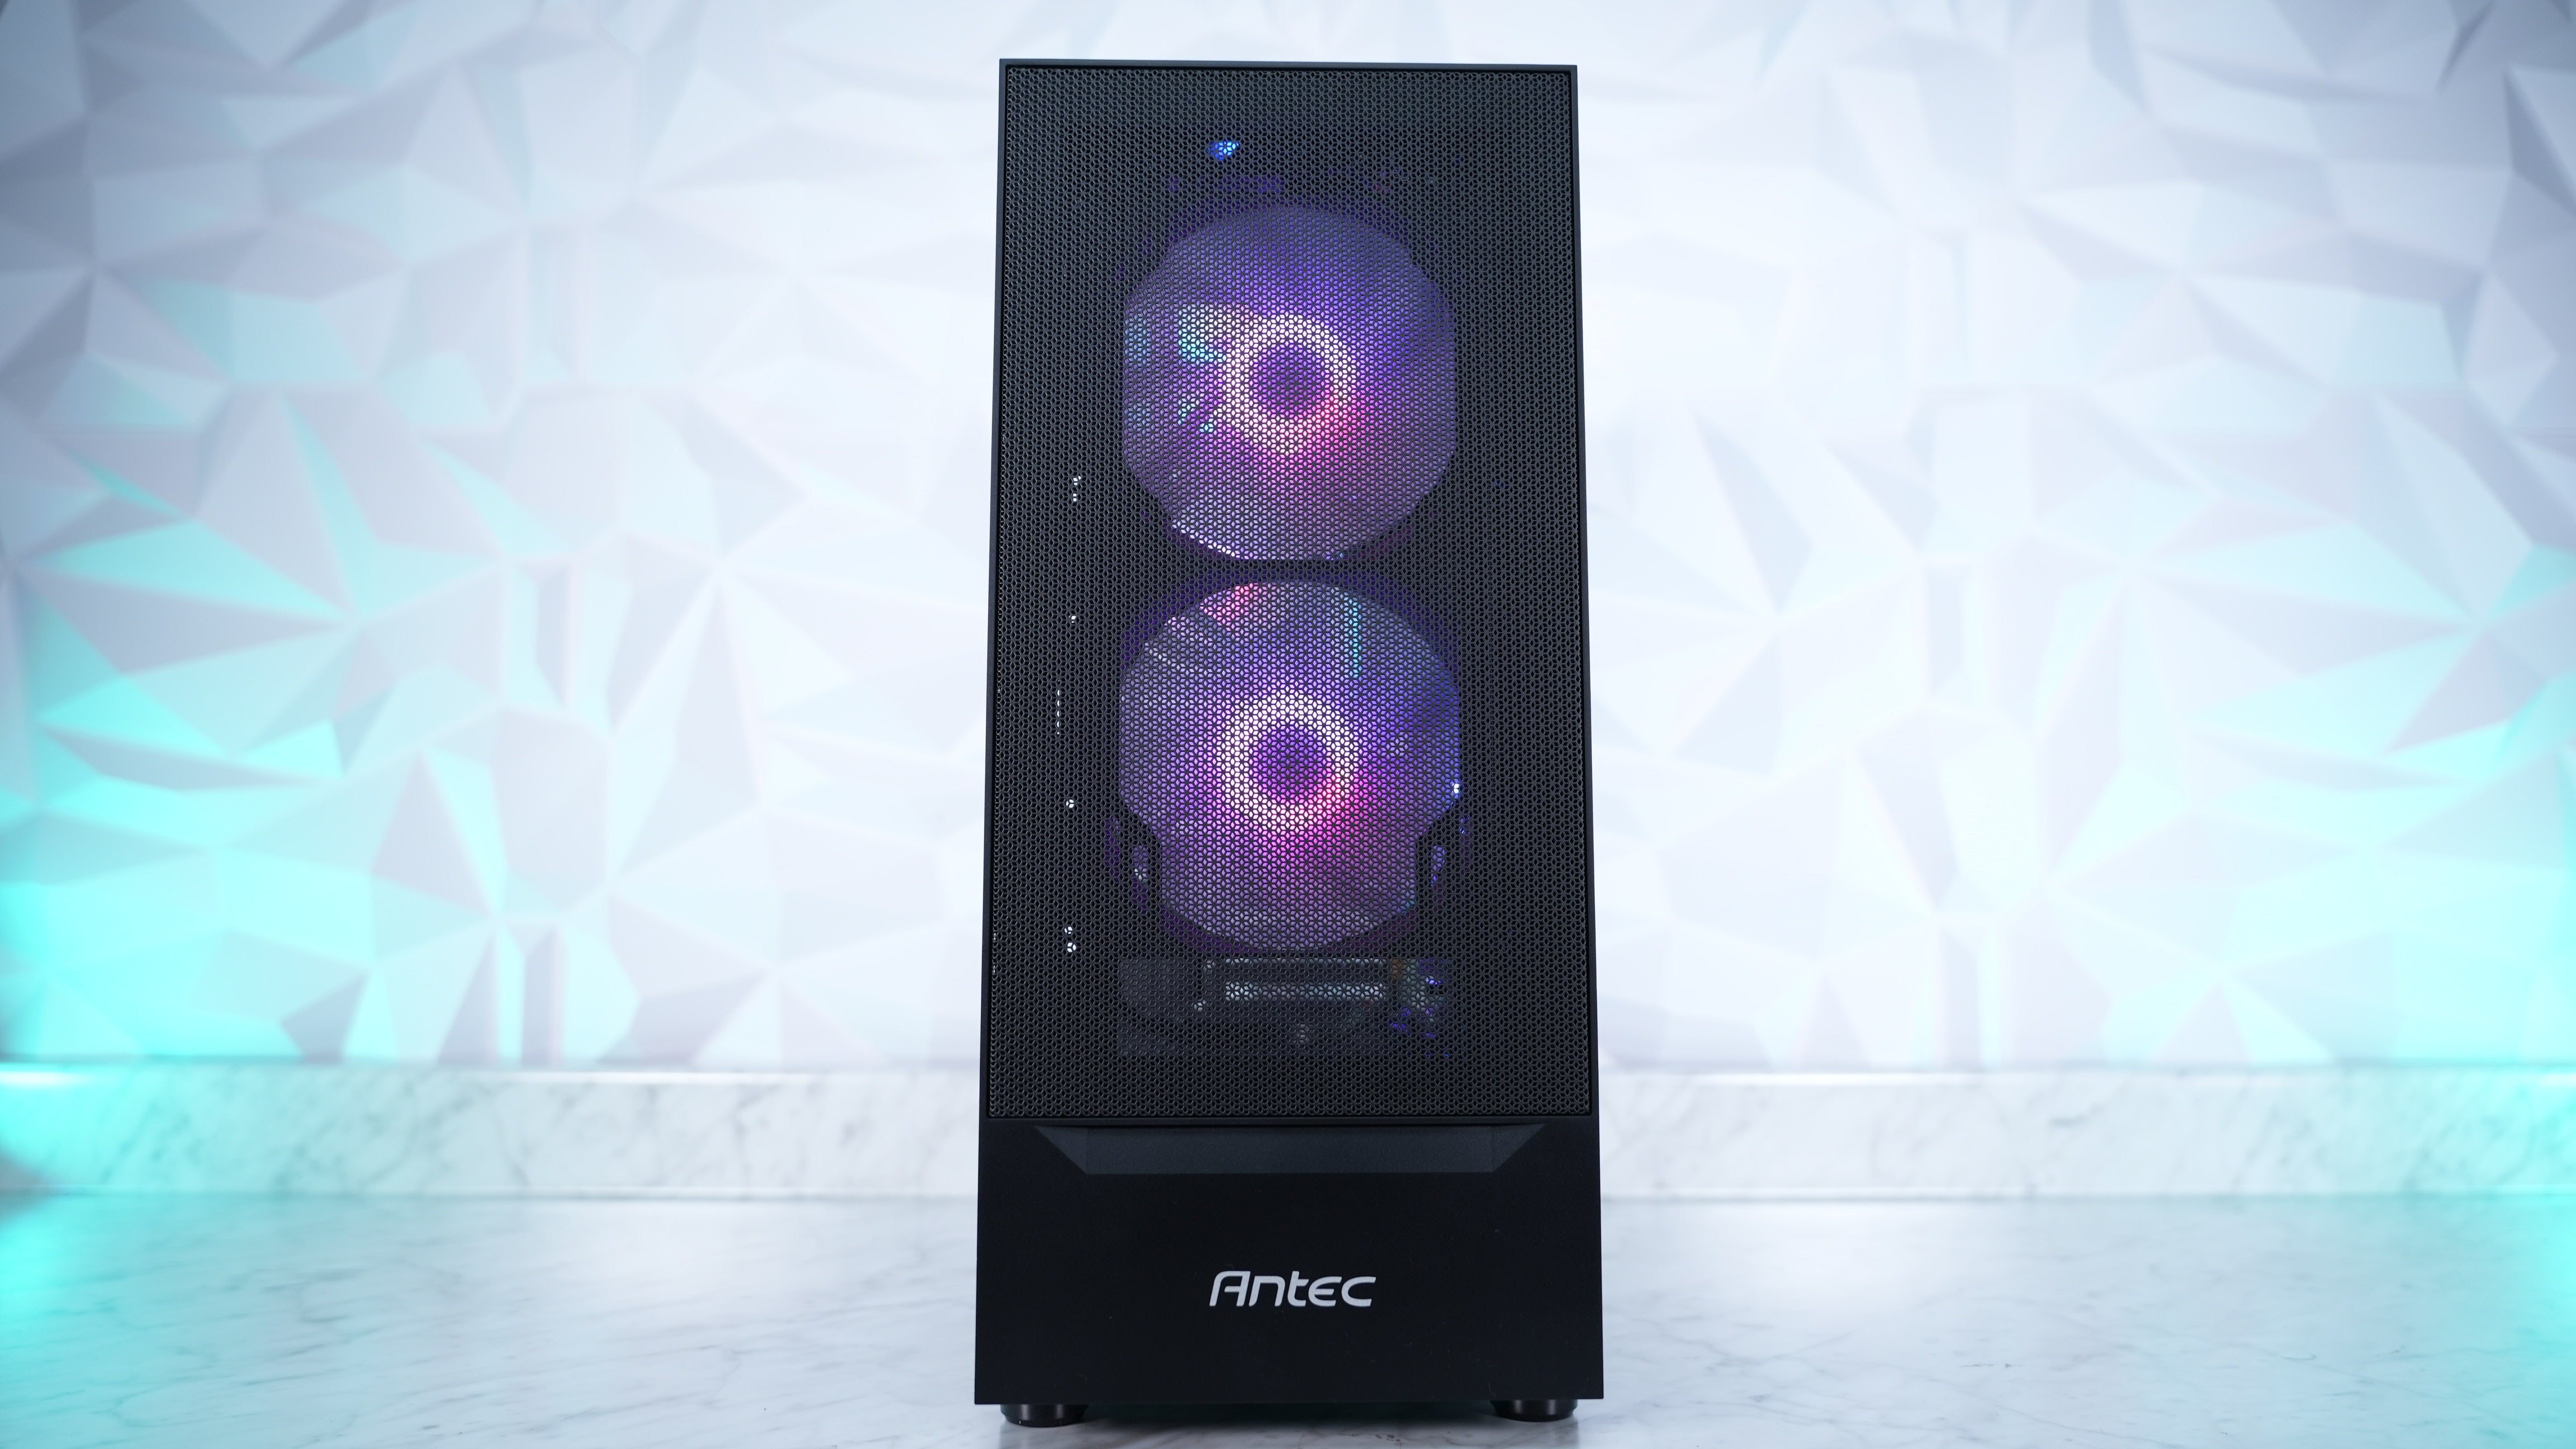 Intel i7 10700F + RTX 2080 Super Gaming/Streaming PC (In Stock)